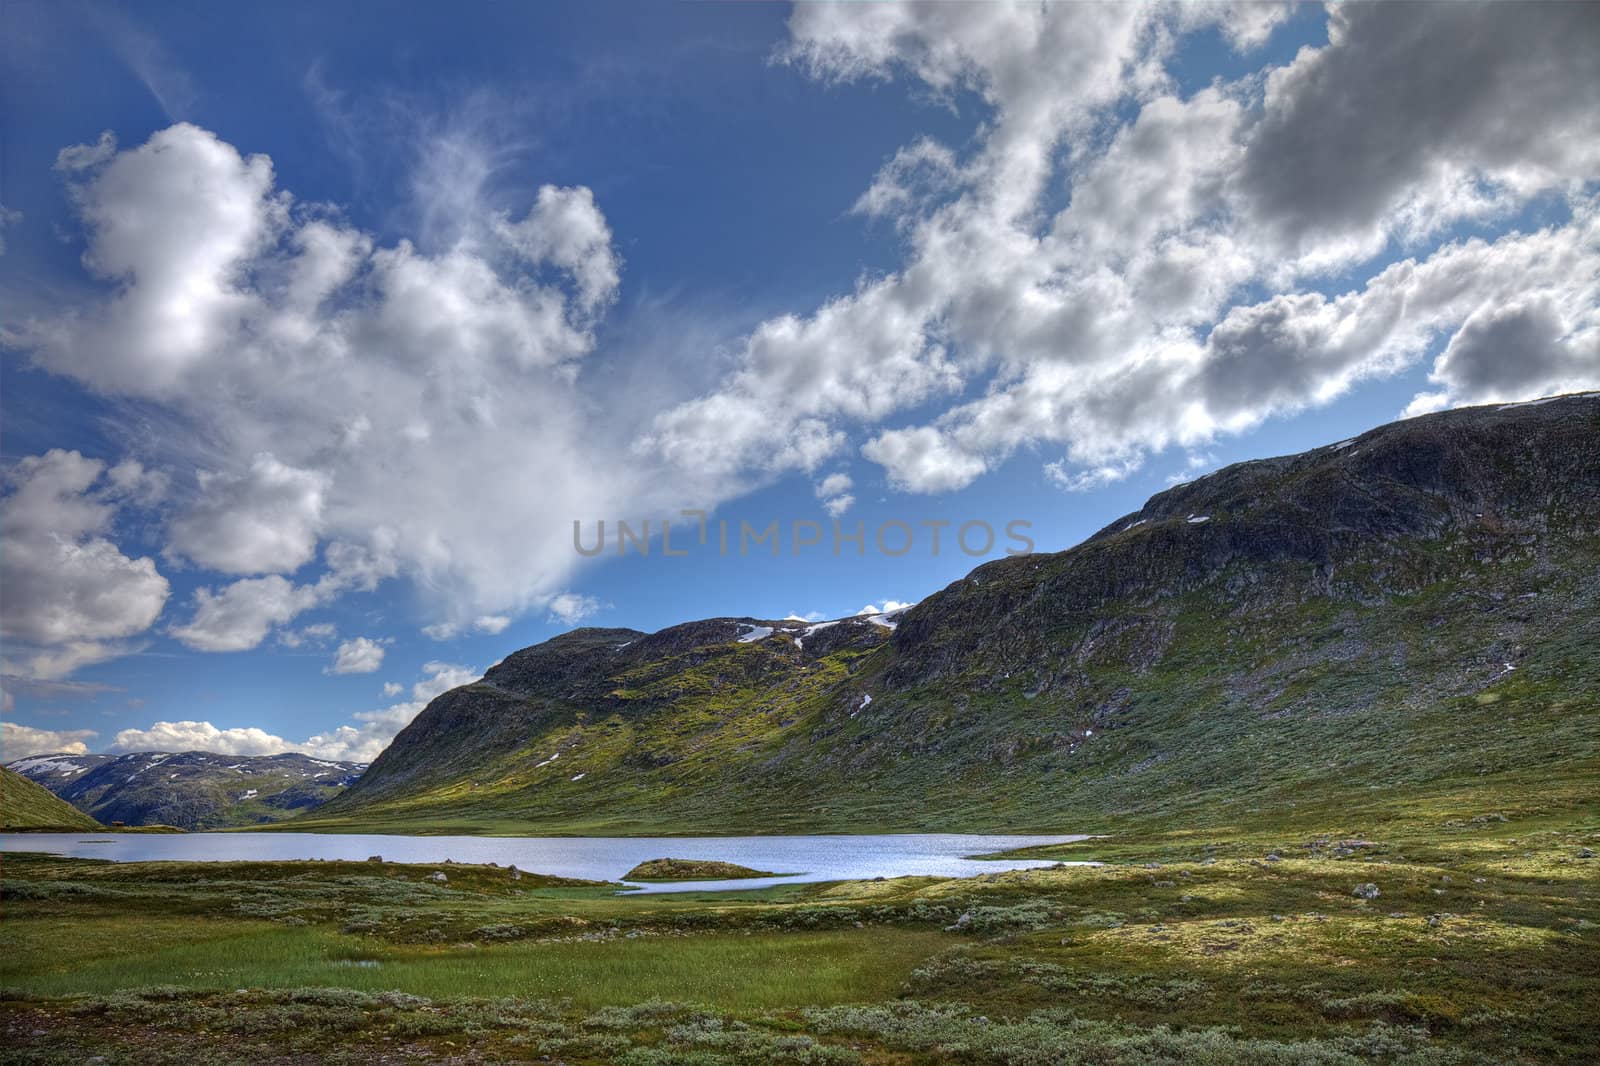 Picturesque norwegian landscape with small lake and green hills, by borodaev